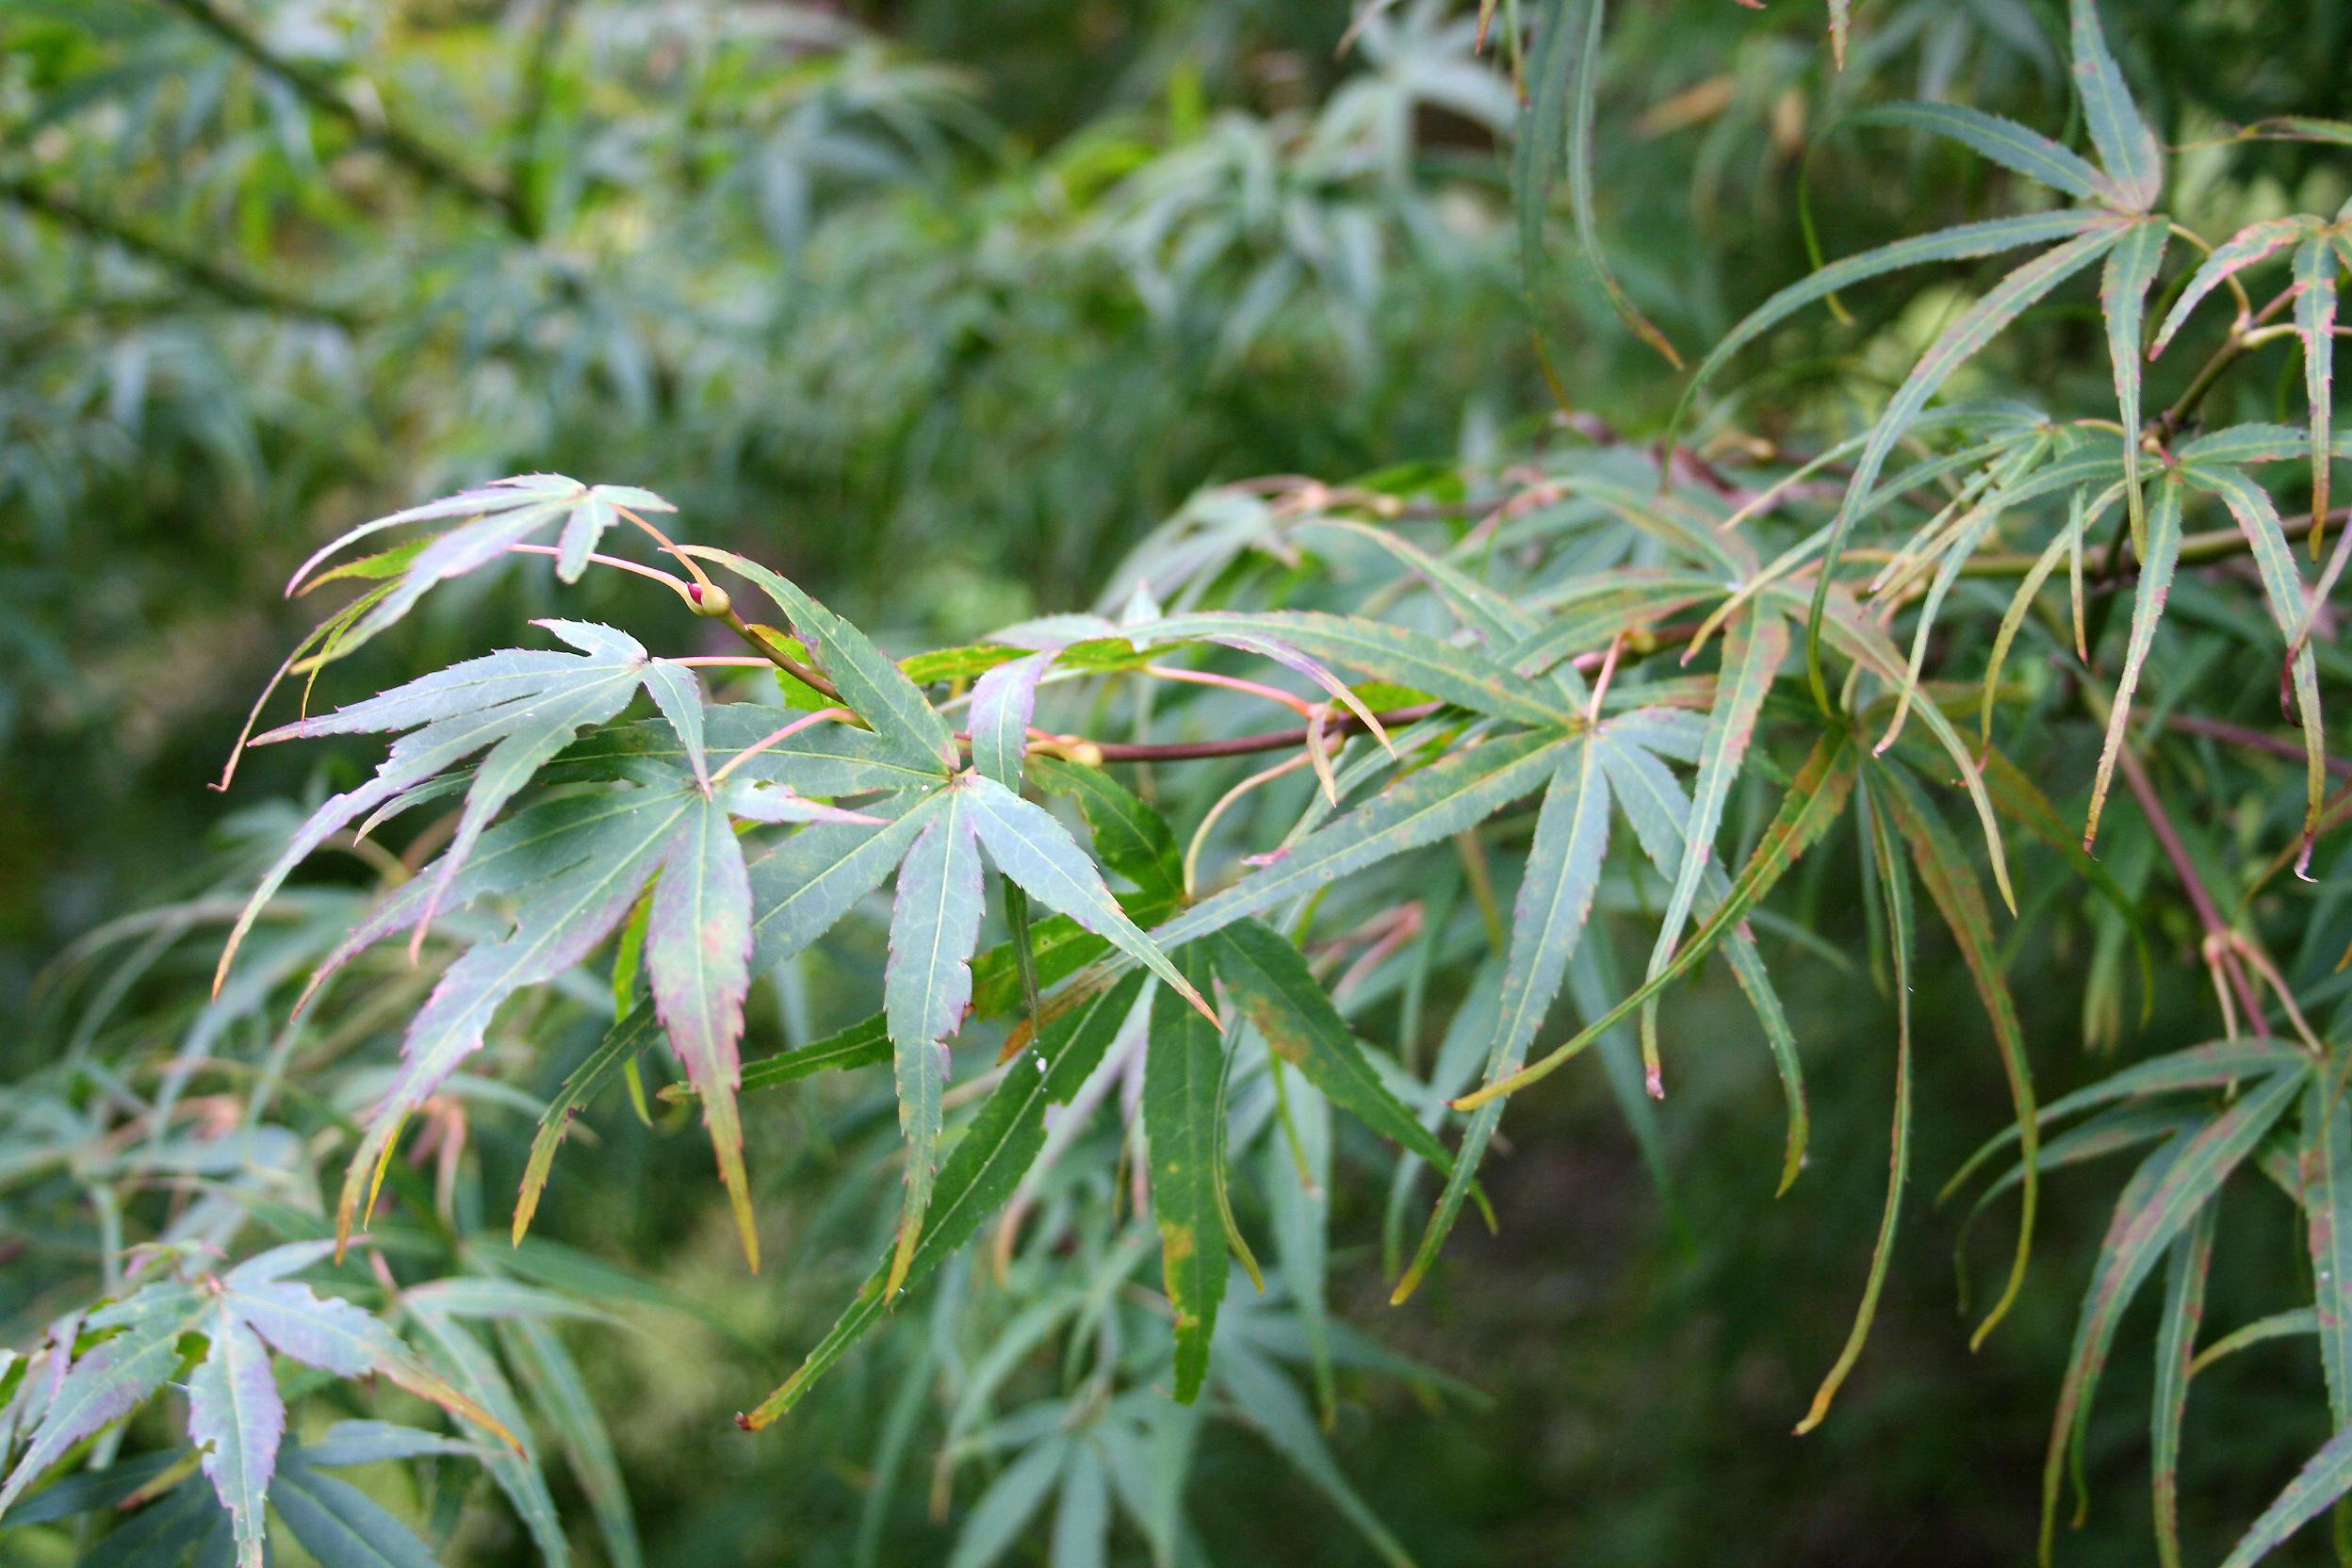 A tree featuring green-pink-red leaves on pink-red stems.